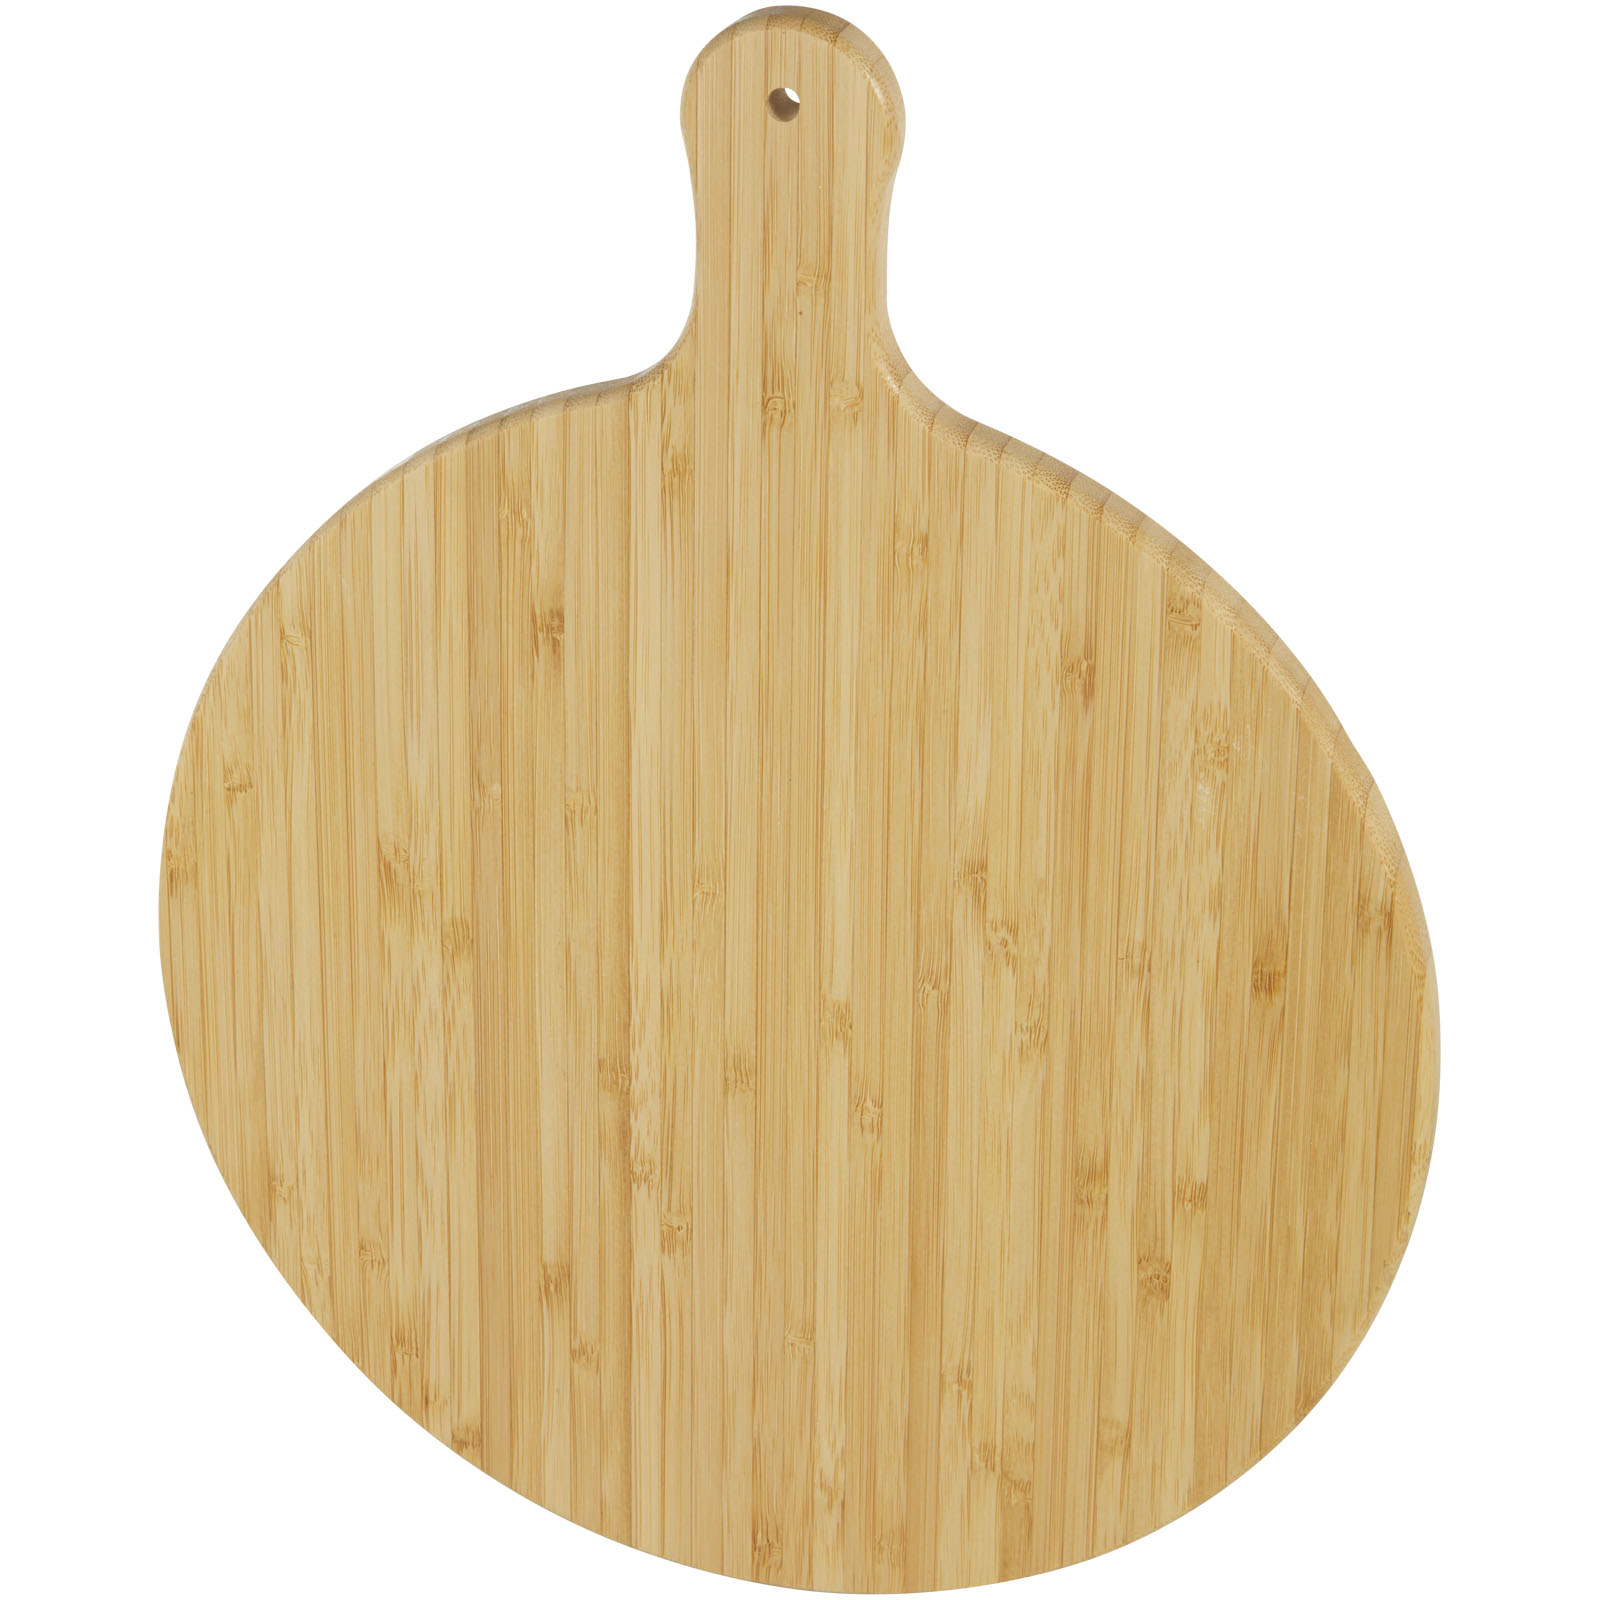 Advertising Cutting Boards - Delys bamboo cutting board